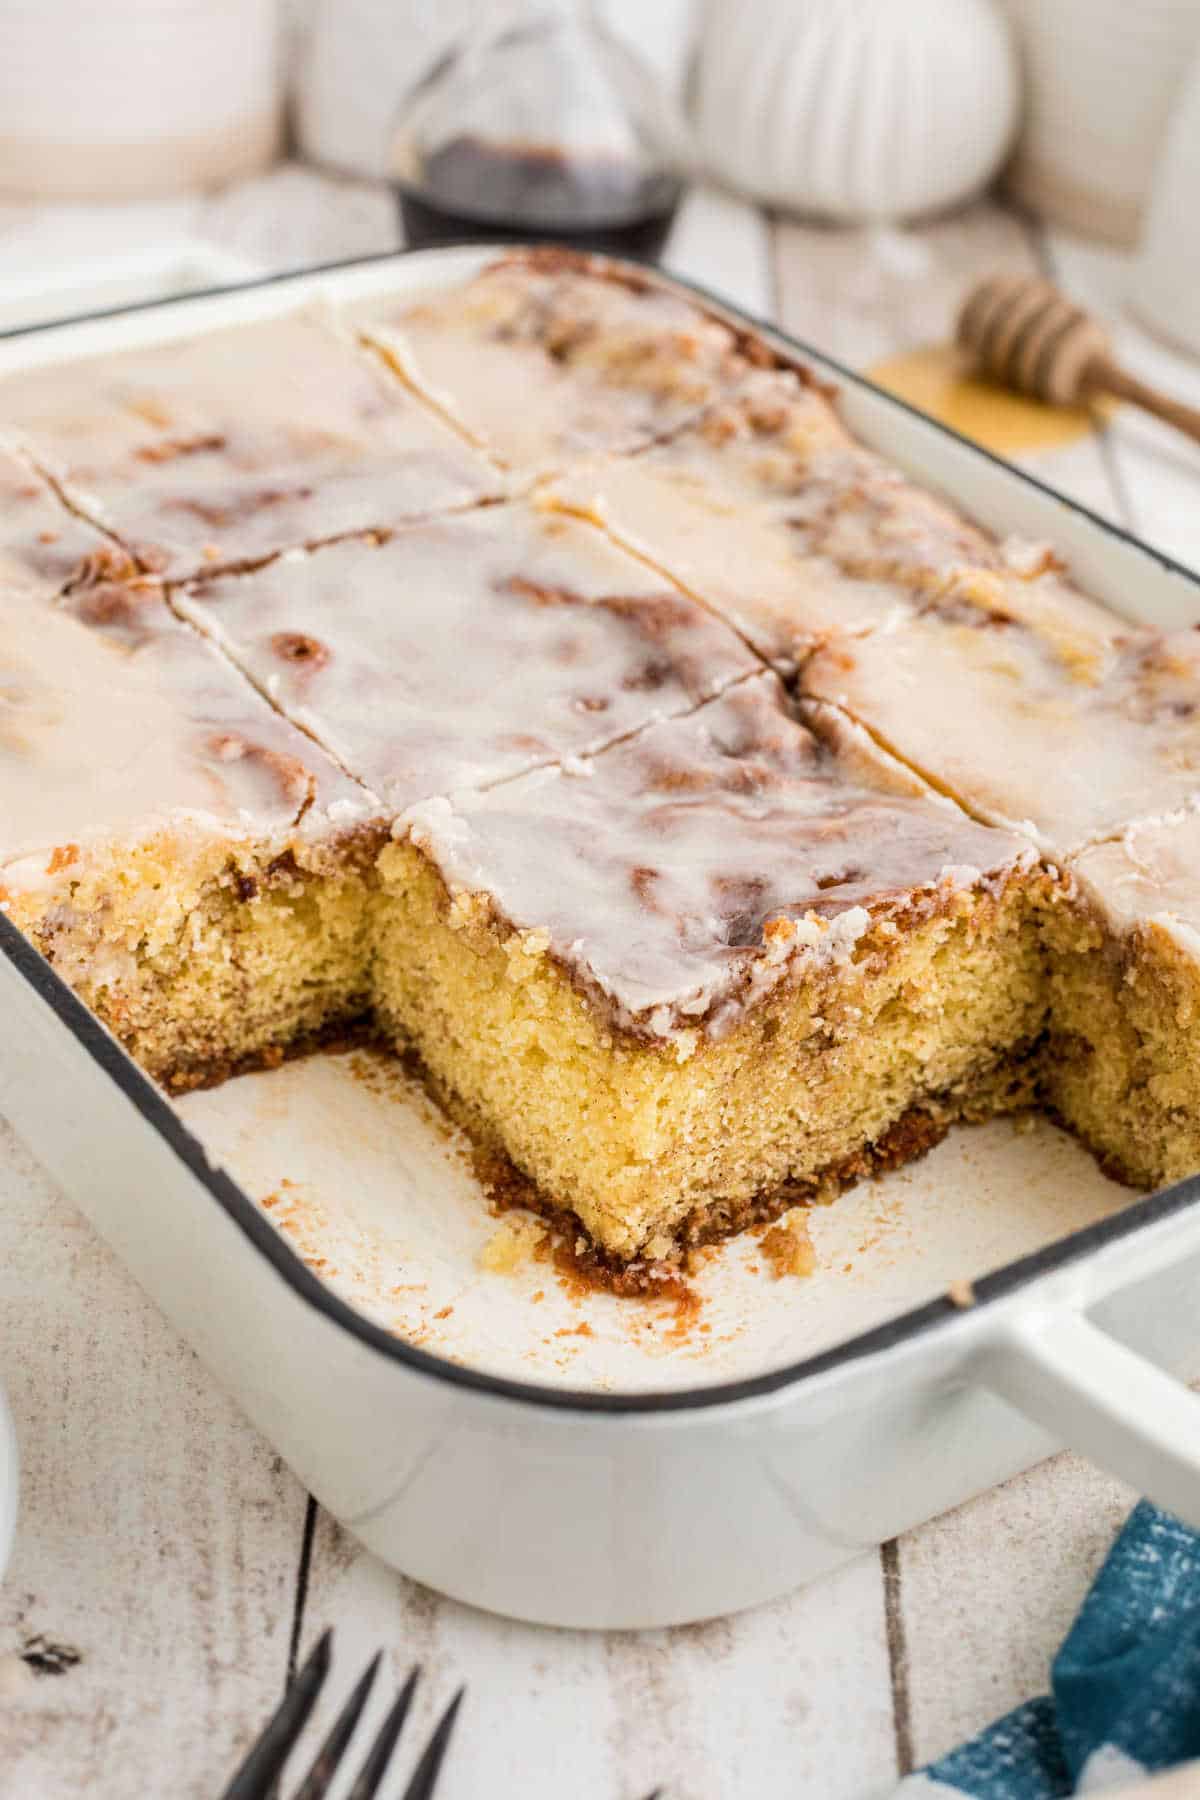 SHot of a baking dish with a honey bun cake with pieces missing.